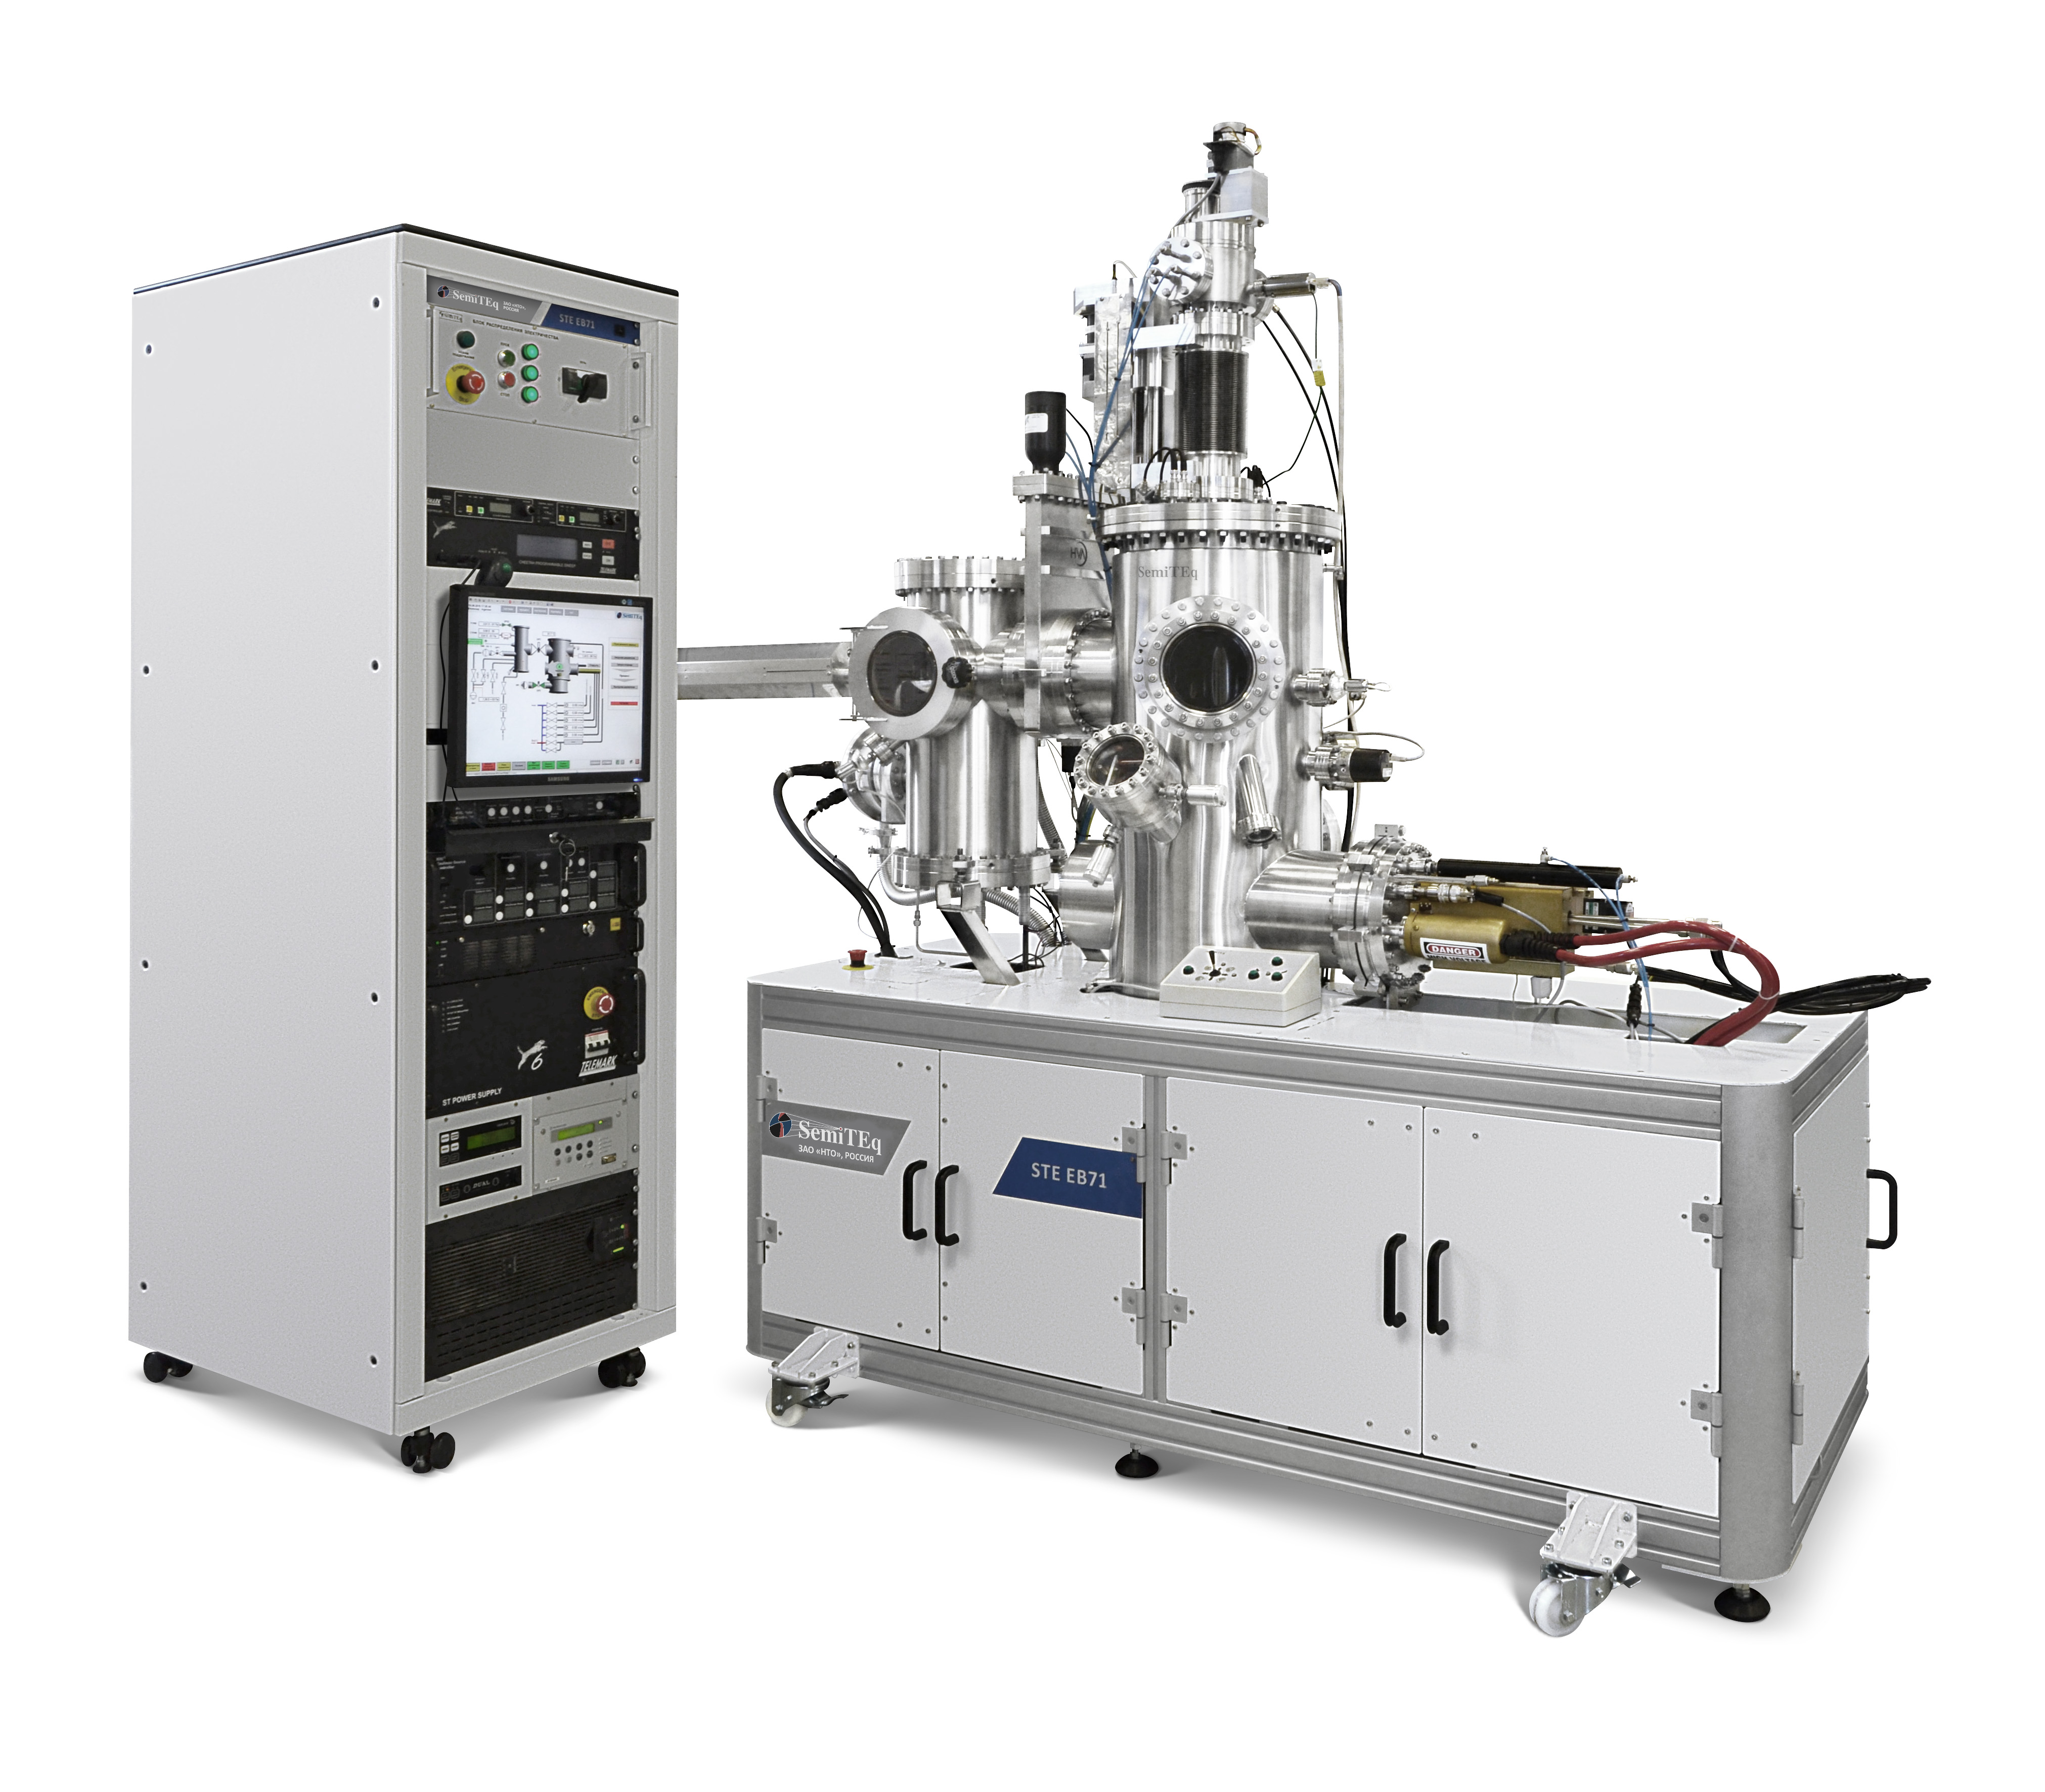 STE EB71 Electron-beam evaporation system for various applications